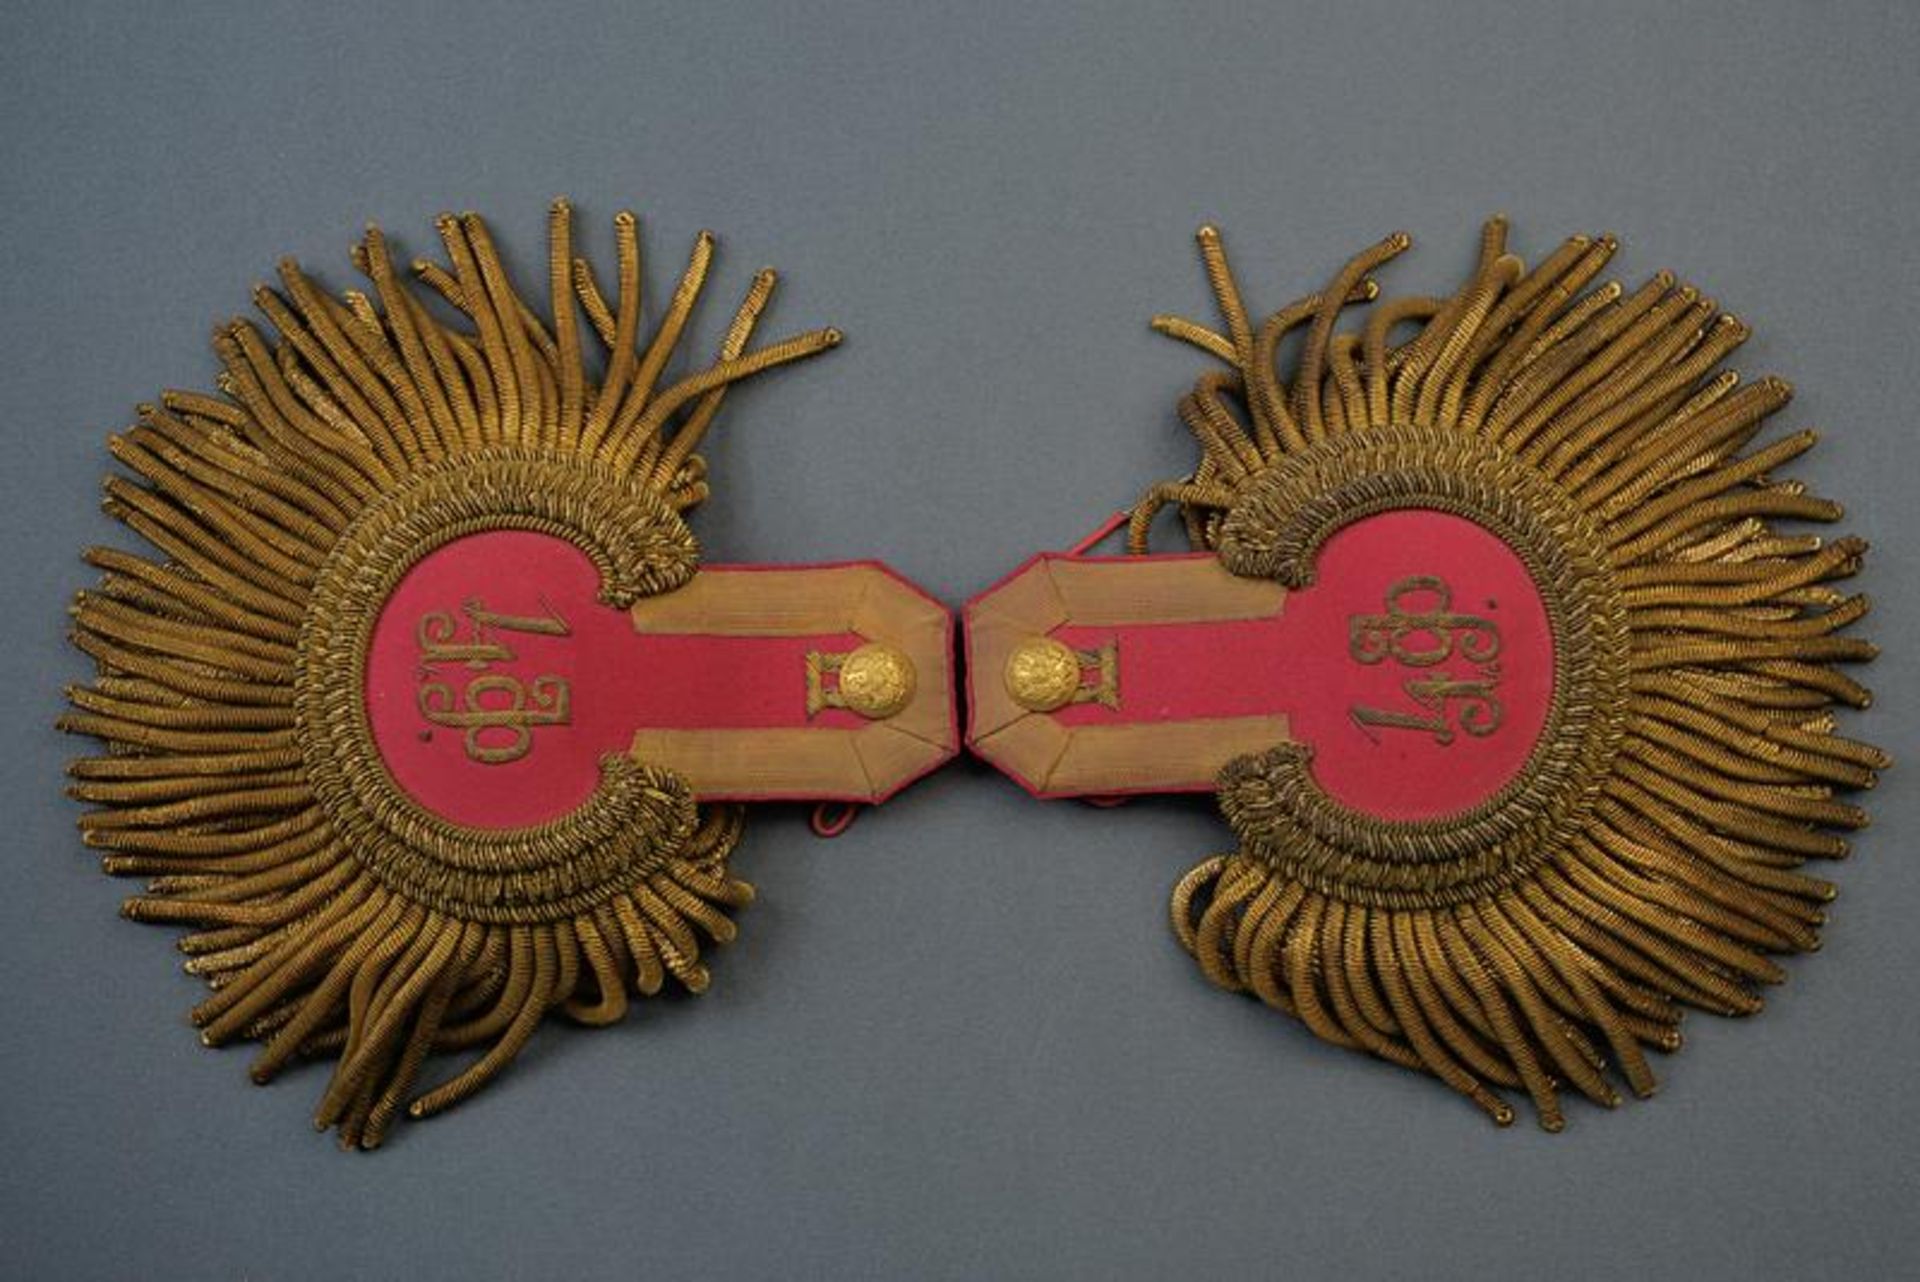 A pair of epaulets for a Colonel of the 4th Finland Rifle Regiment